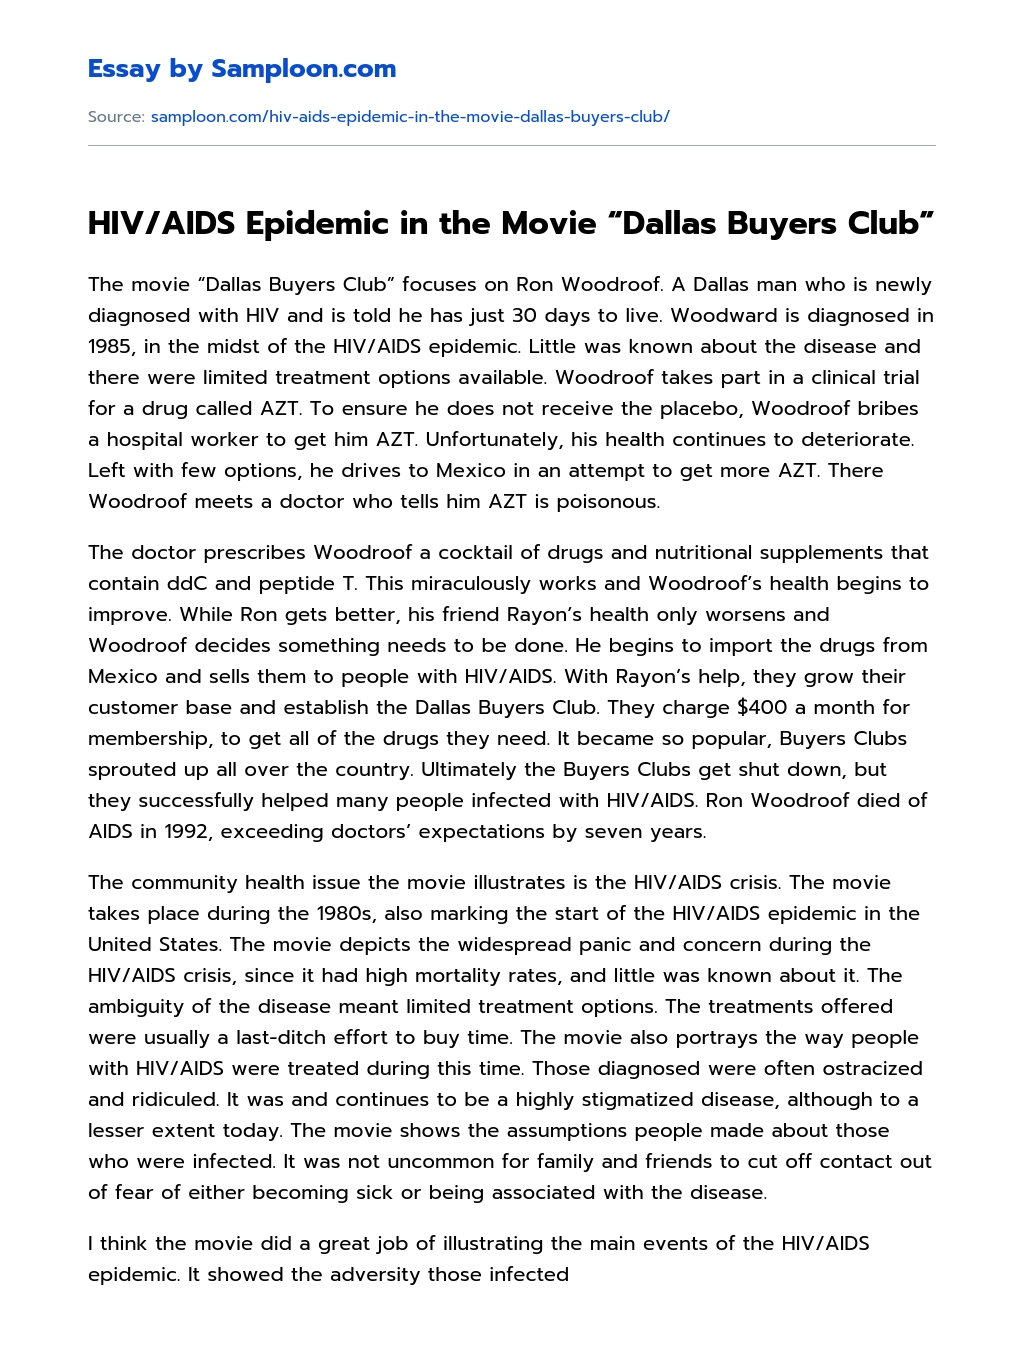 HIV/AIDS Epidemic in the Movie “Dallas Buyers Club” Analytical Essay essay